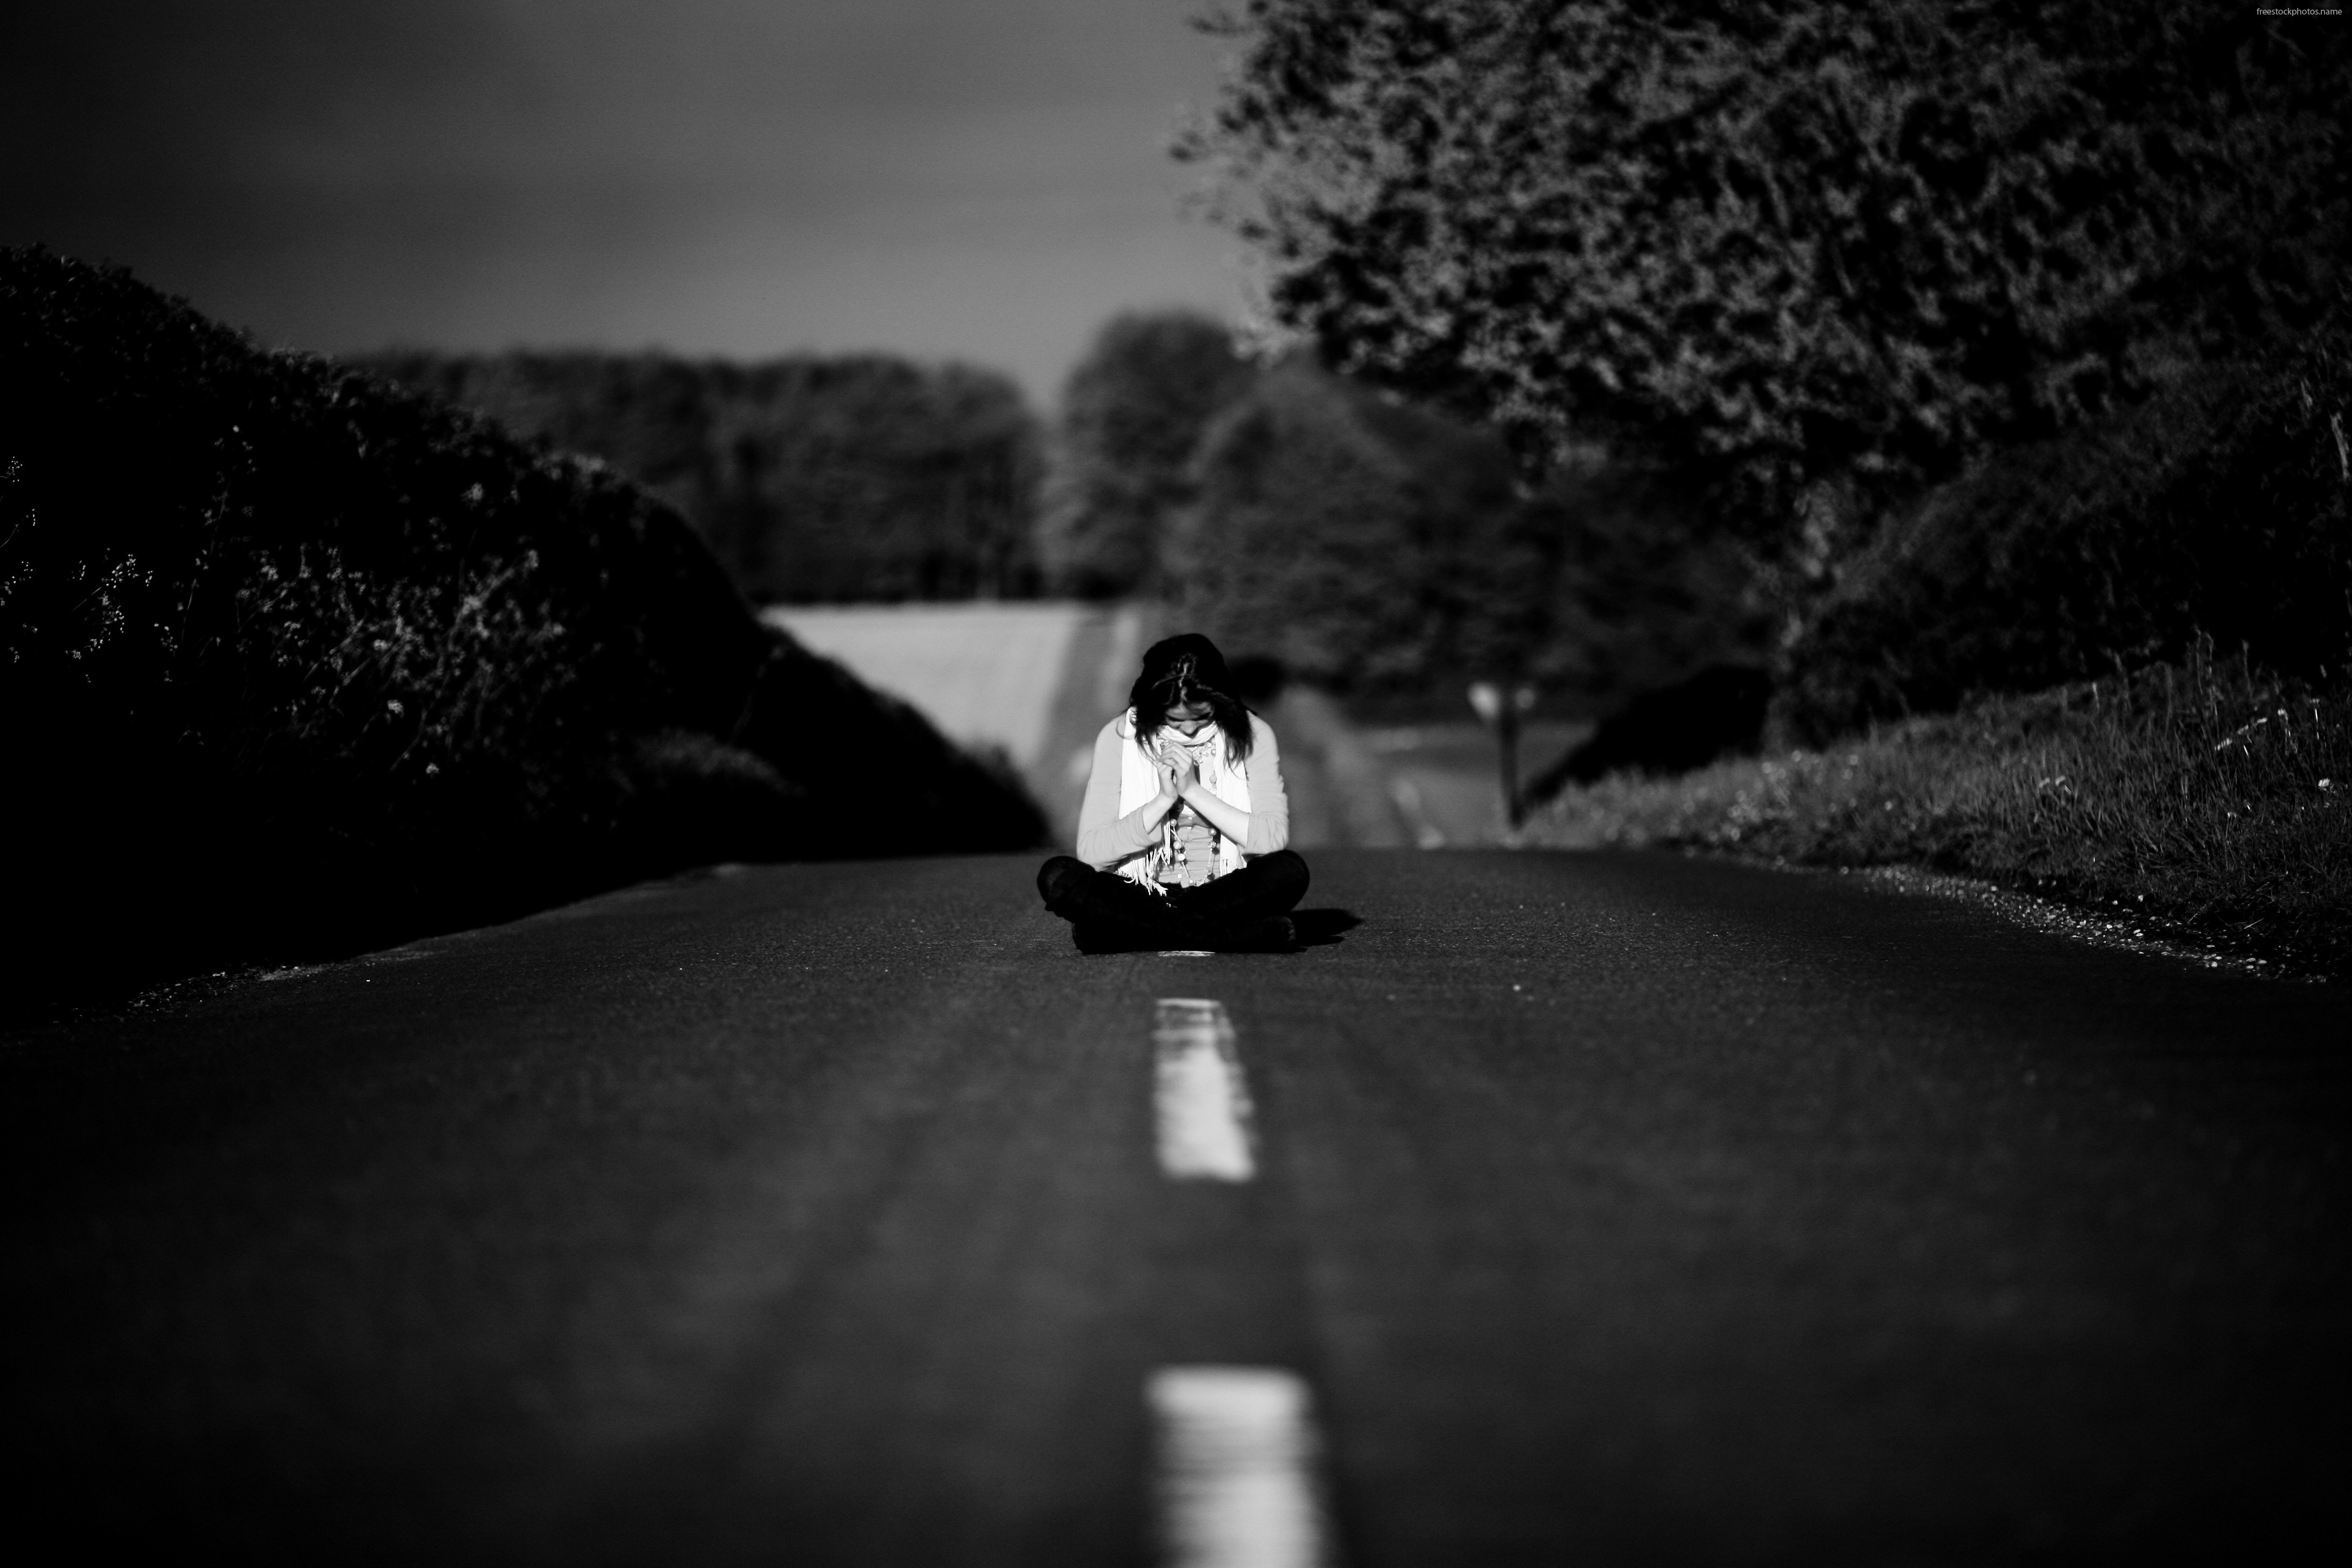 lonely, Mood, Sad, Alone, Sadness, Emotion, People, Loneliness, Solitude, Sorrow, Girl, Road, Suicide, Death Wallpaper